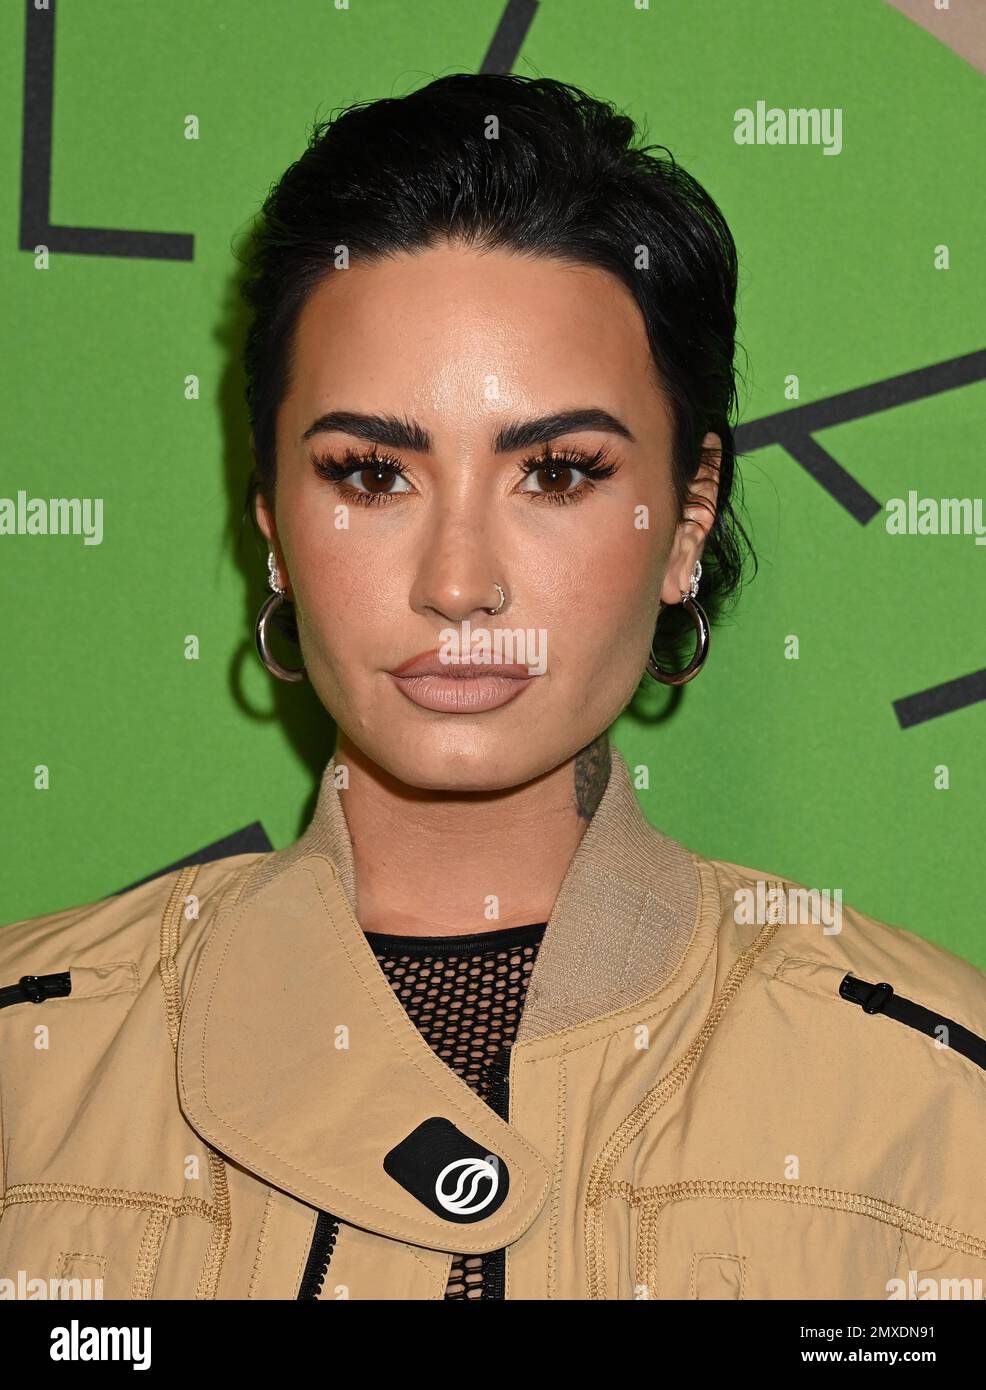 Los Angeles, CA. February 2, 2023 Demi Lovato arriving at the Stella McCartney X Adidas party held at Henson Recording Studio on February 2, 2023 in Los Angeles, CA. © Tammie Arroyo / AFF-USA.com Stock Photo